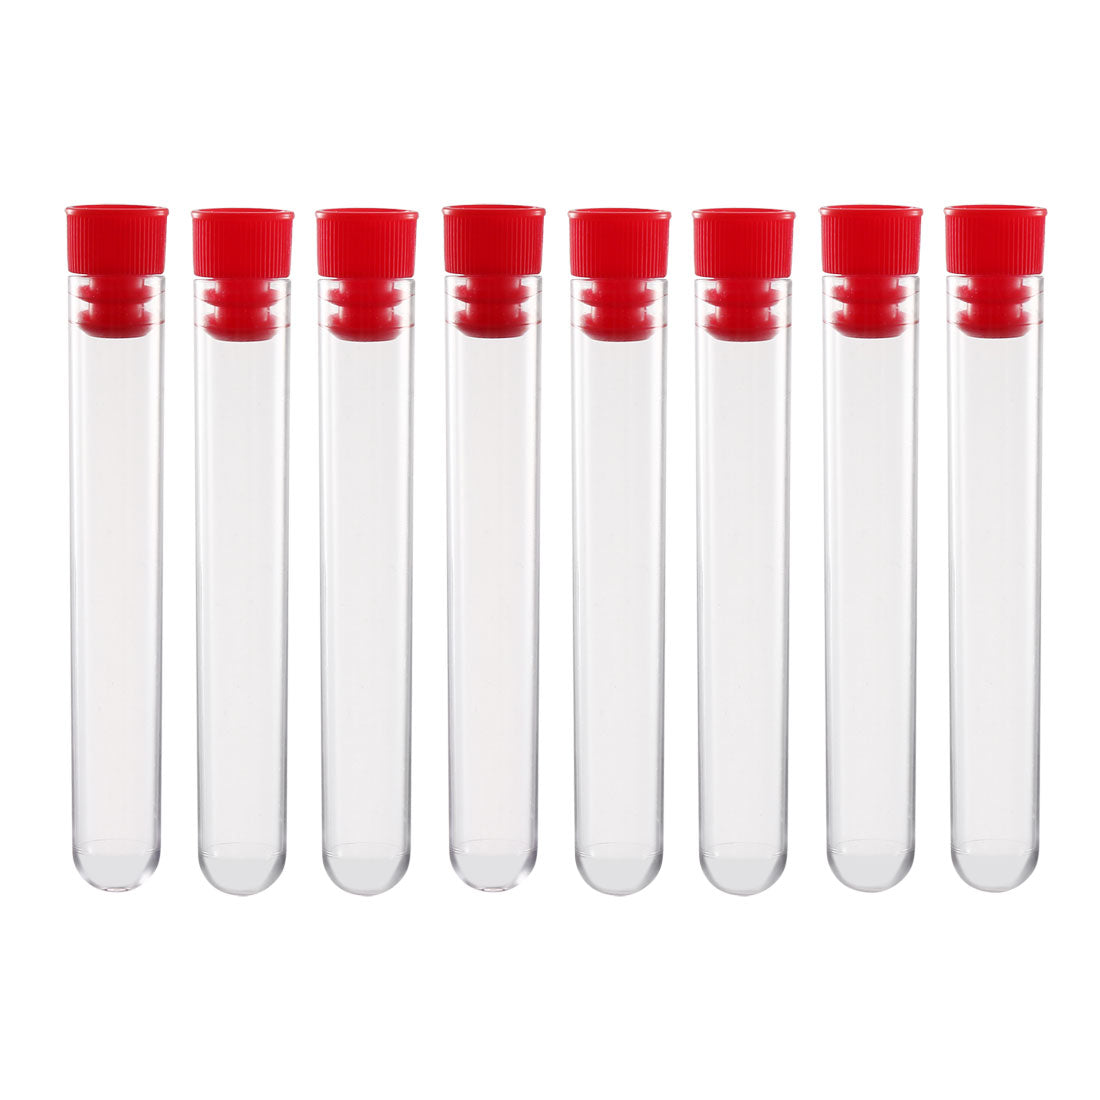 Uxcell Uxcell 30 Pcs Centrifuge Test Tube Round Bottom Polystyrene with Blue Cap